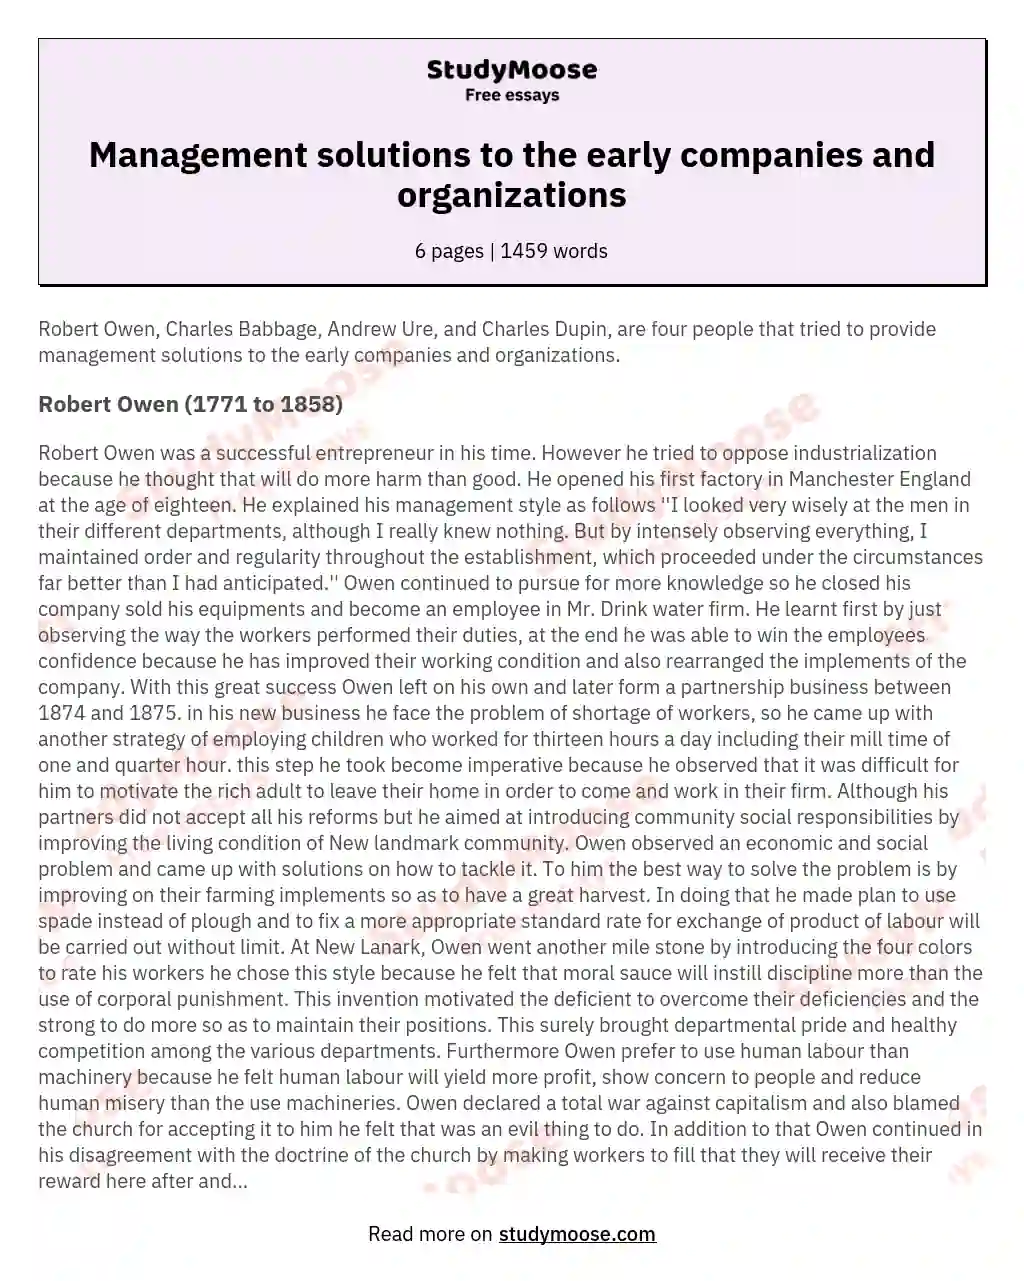 Management solutions to the early companies and organizations essay